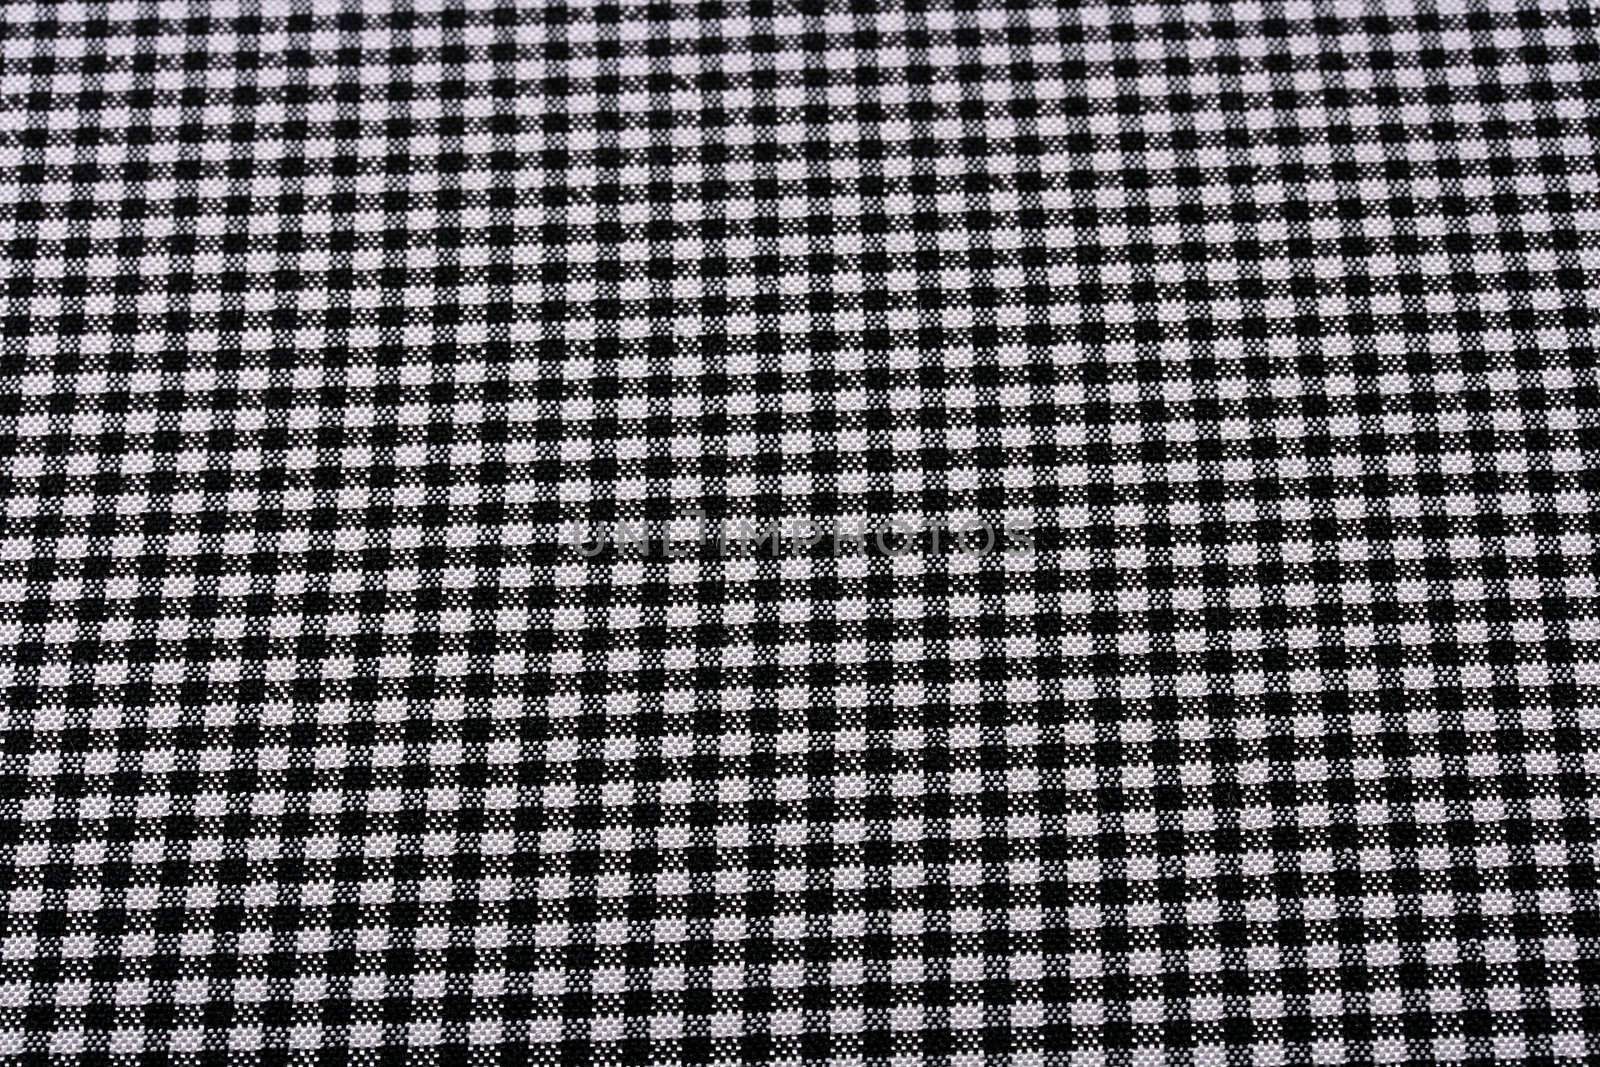 Fabric in a black and white small section as a background.